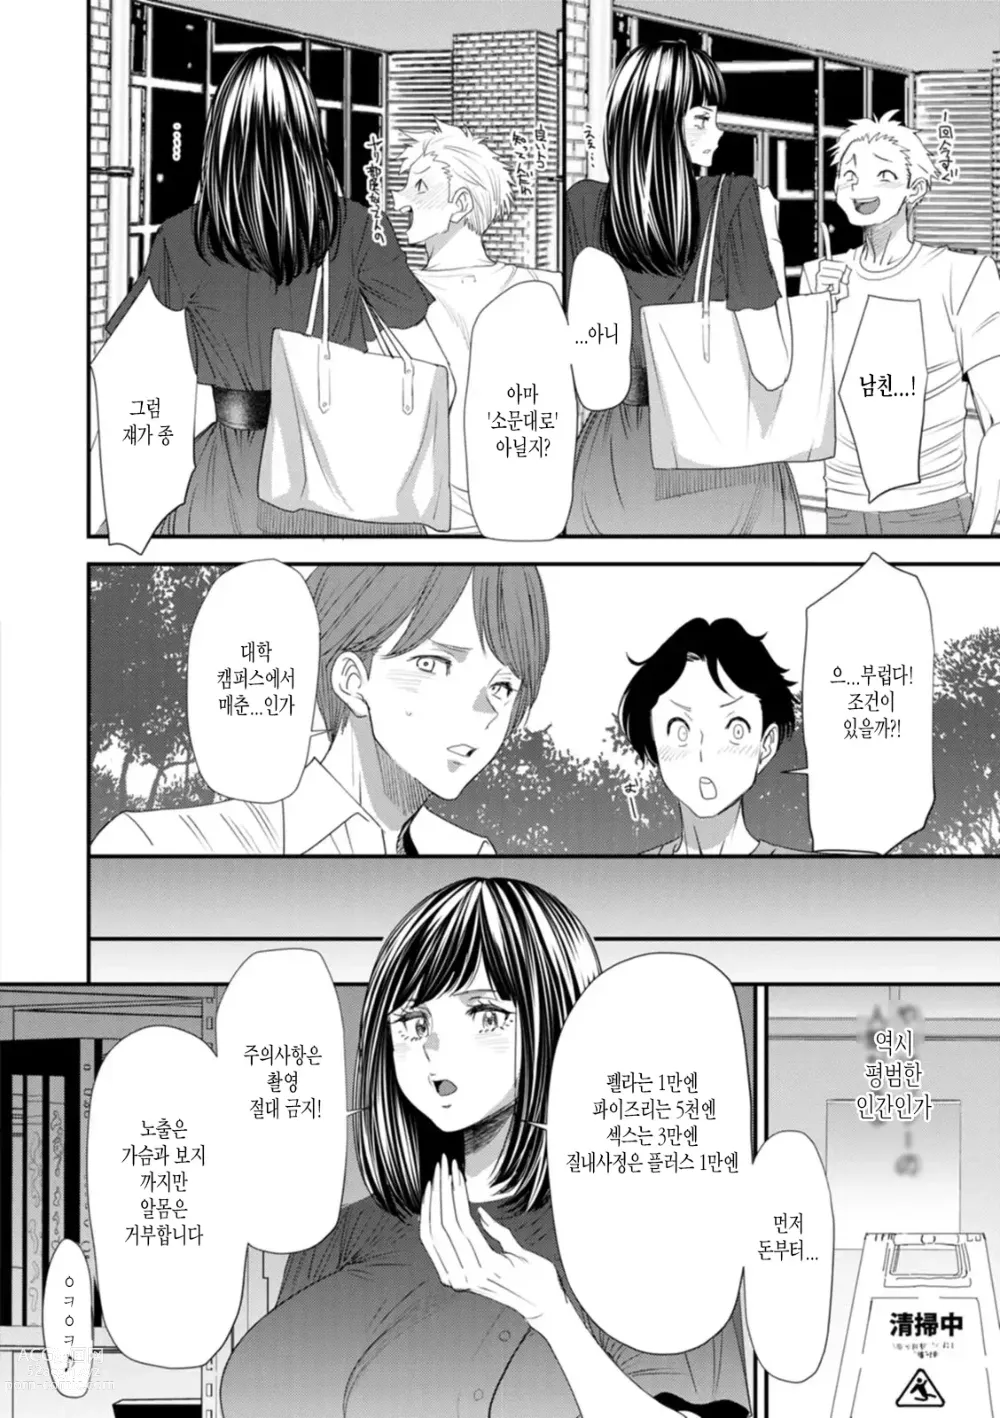 Page 12 of manga Inma Joshi Daisei no Yuuutsu Ch. 1-3  The Melancholy of the Succubus who is a college student 음마 여대생의 우울